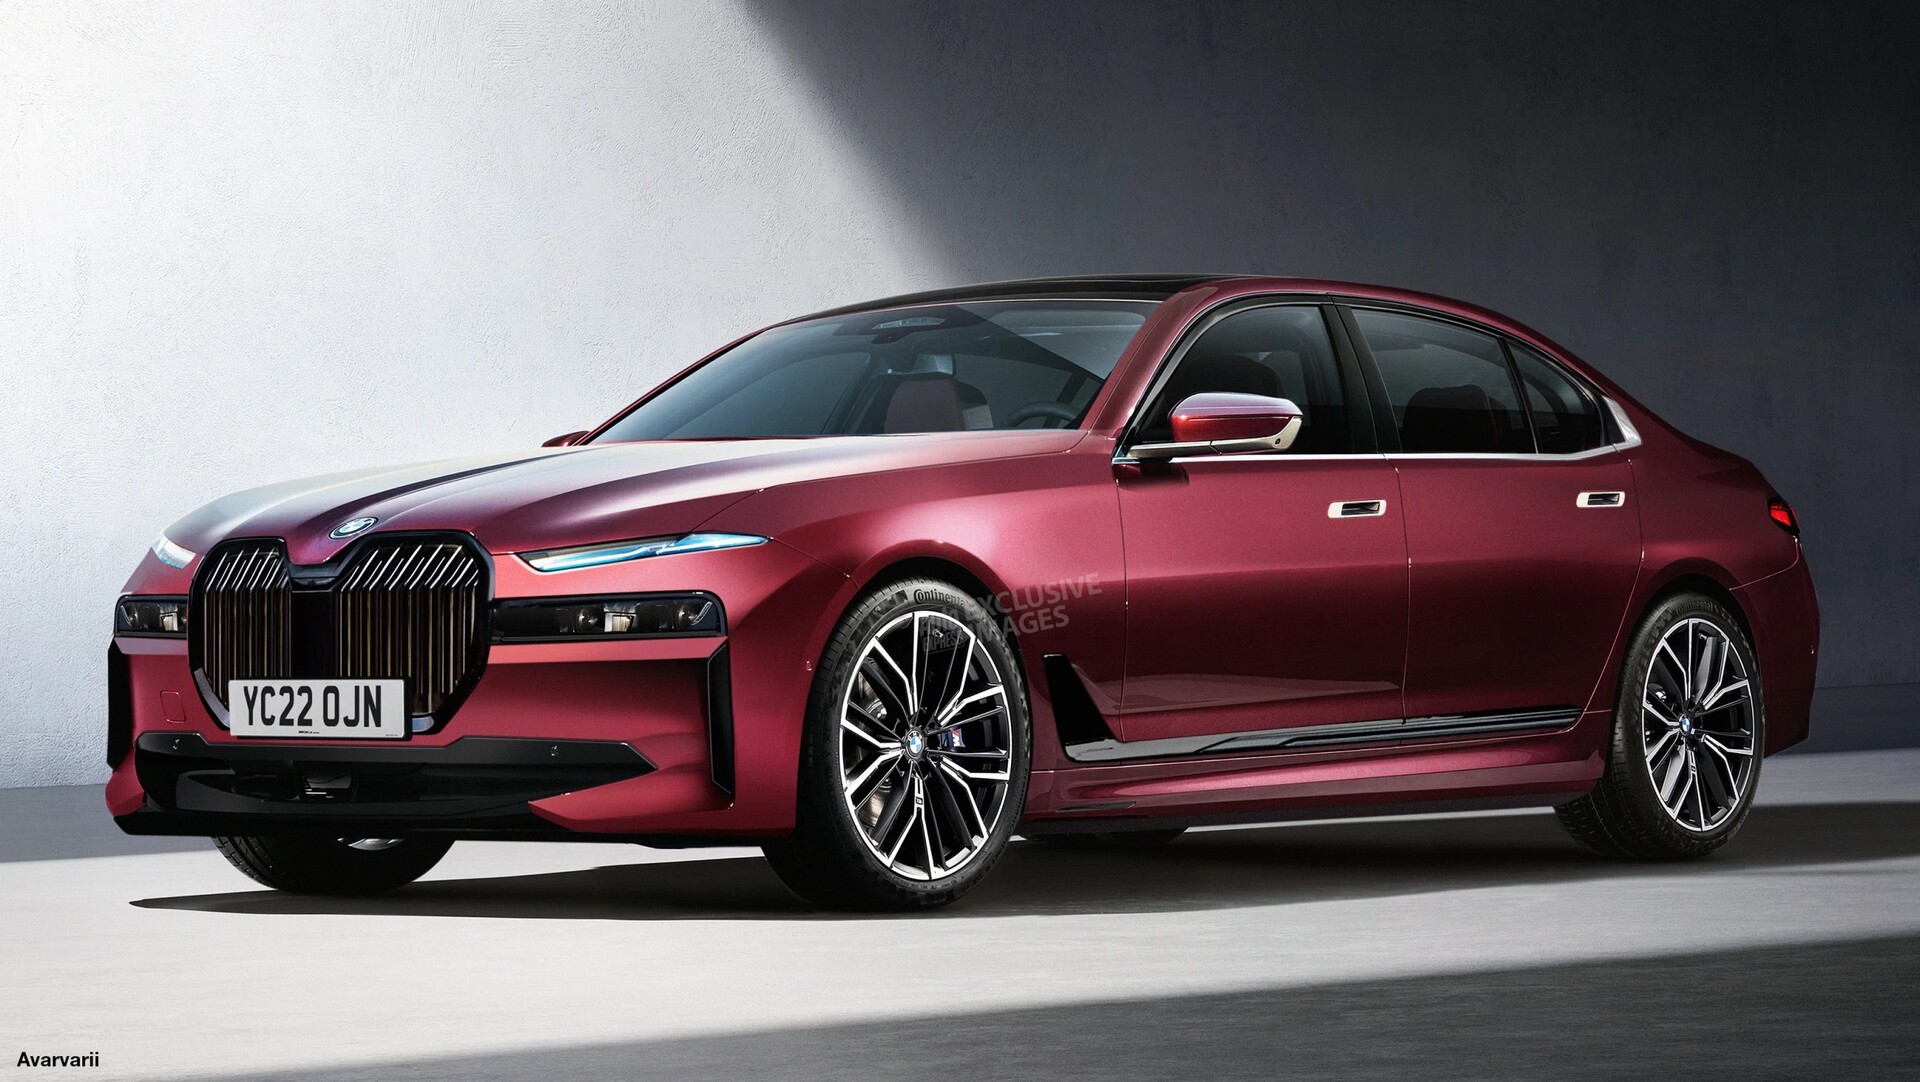 Beautiful concept pictures show the new 2022 BMW 7 Series, which